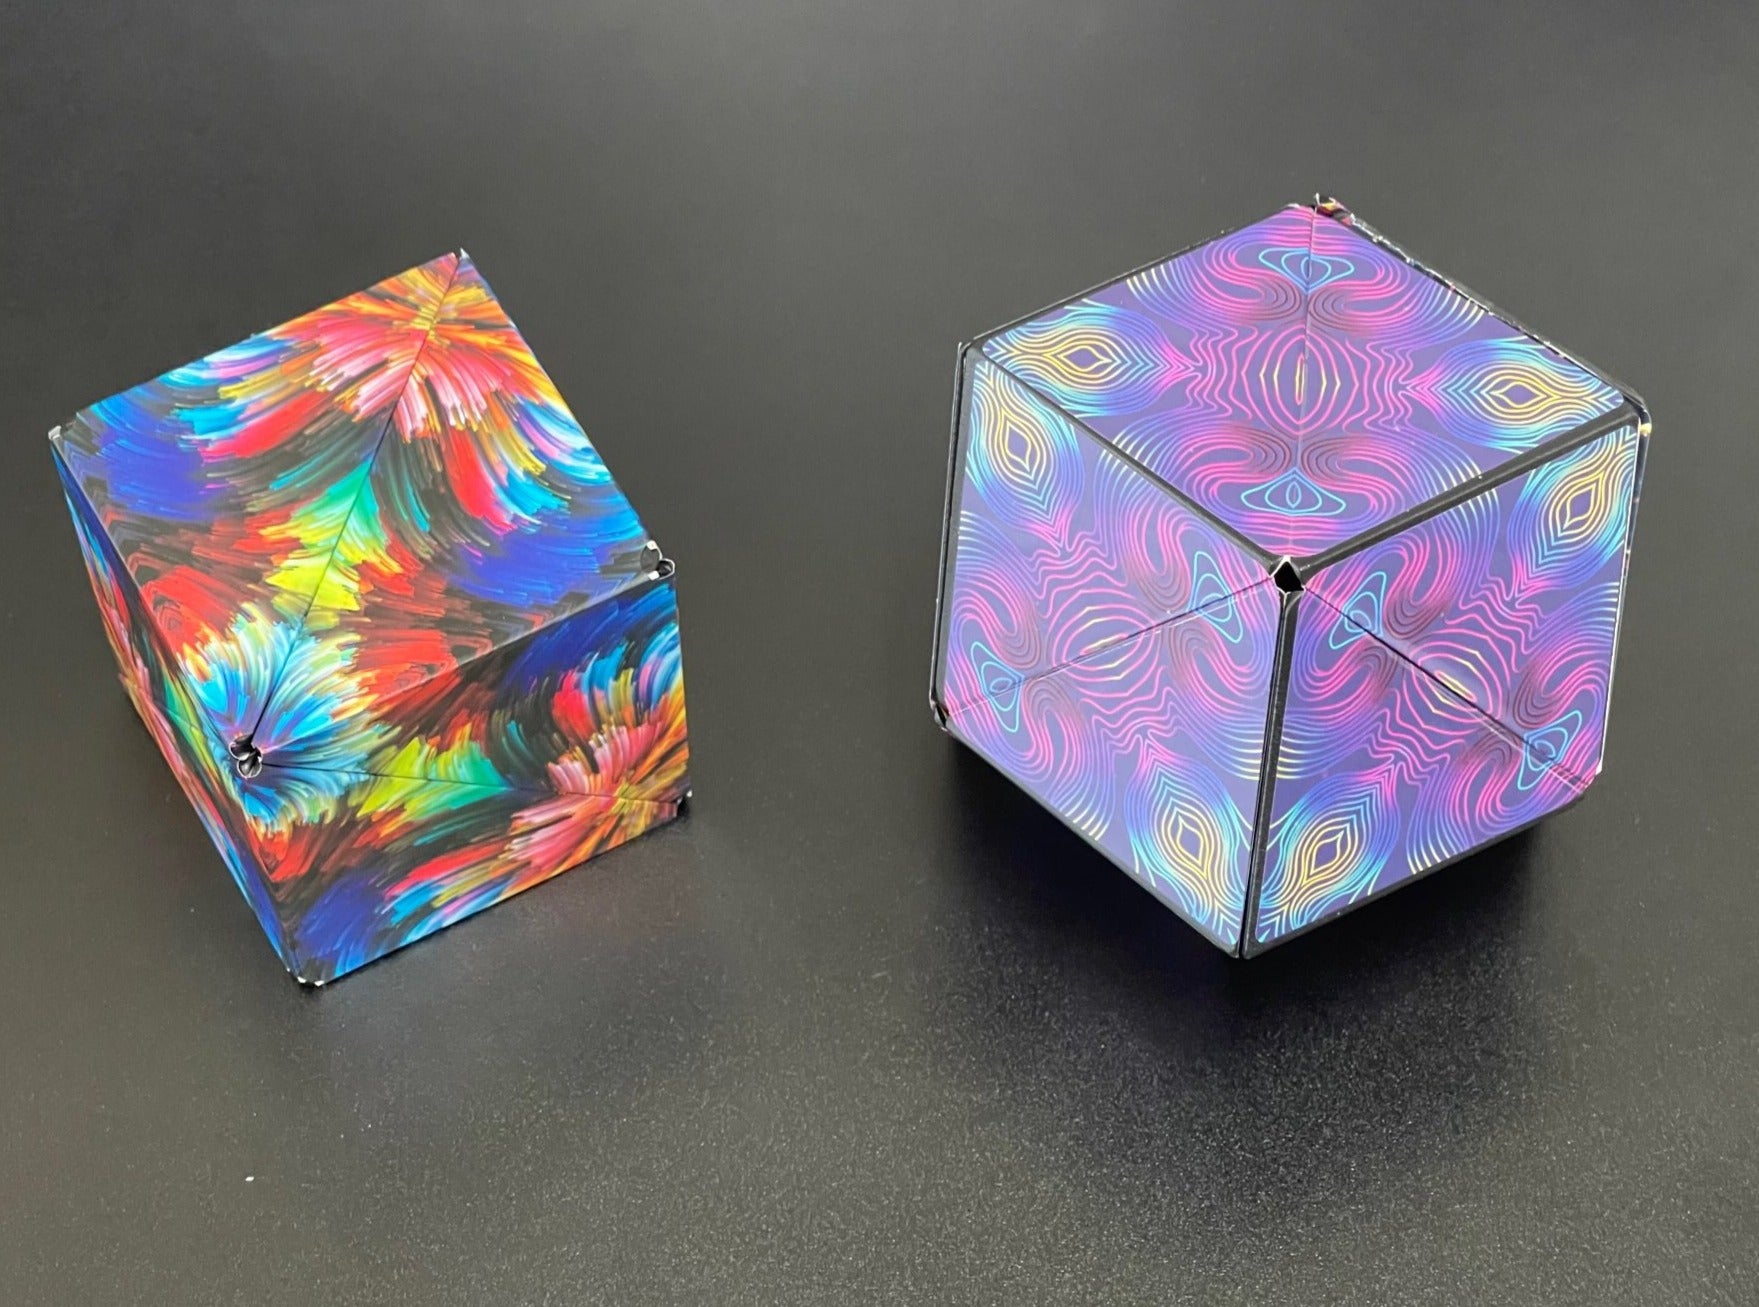 Conundrum House - Kaleidoscope pattern inside out and Color Burst cube. Two of the over 70 shapes that the Unfolding Magnetic Magic Cube can be shaped into.